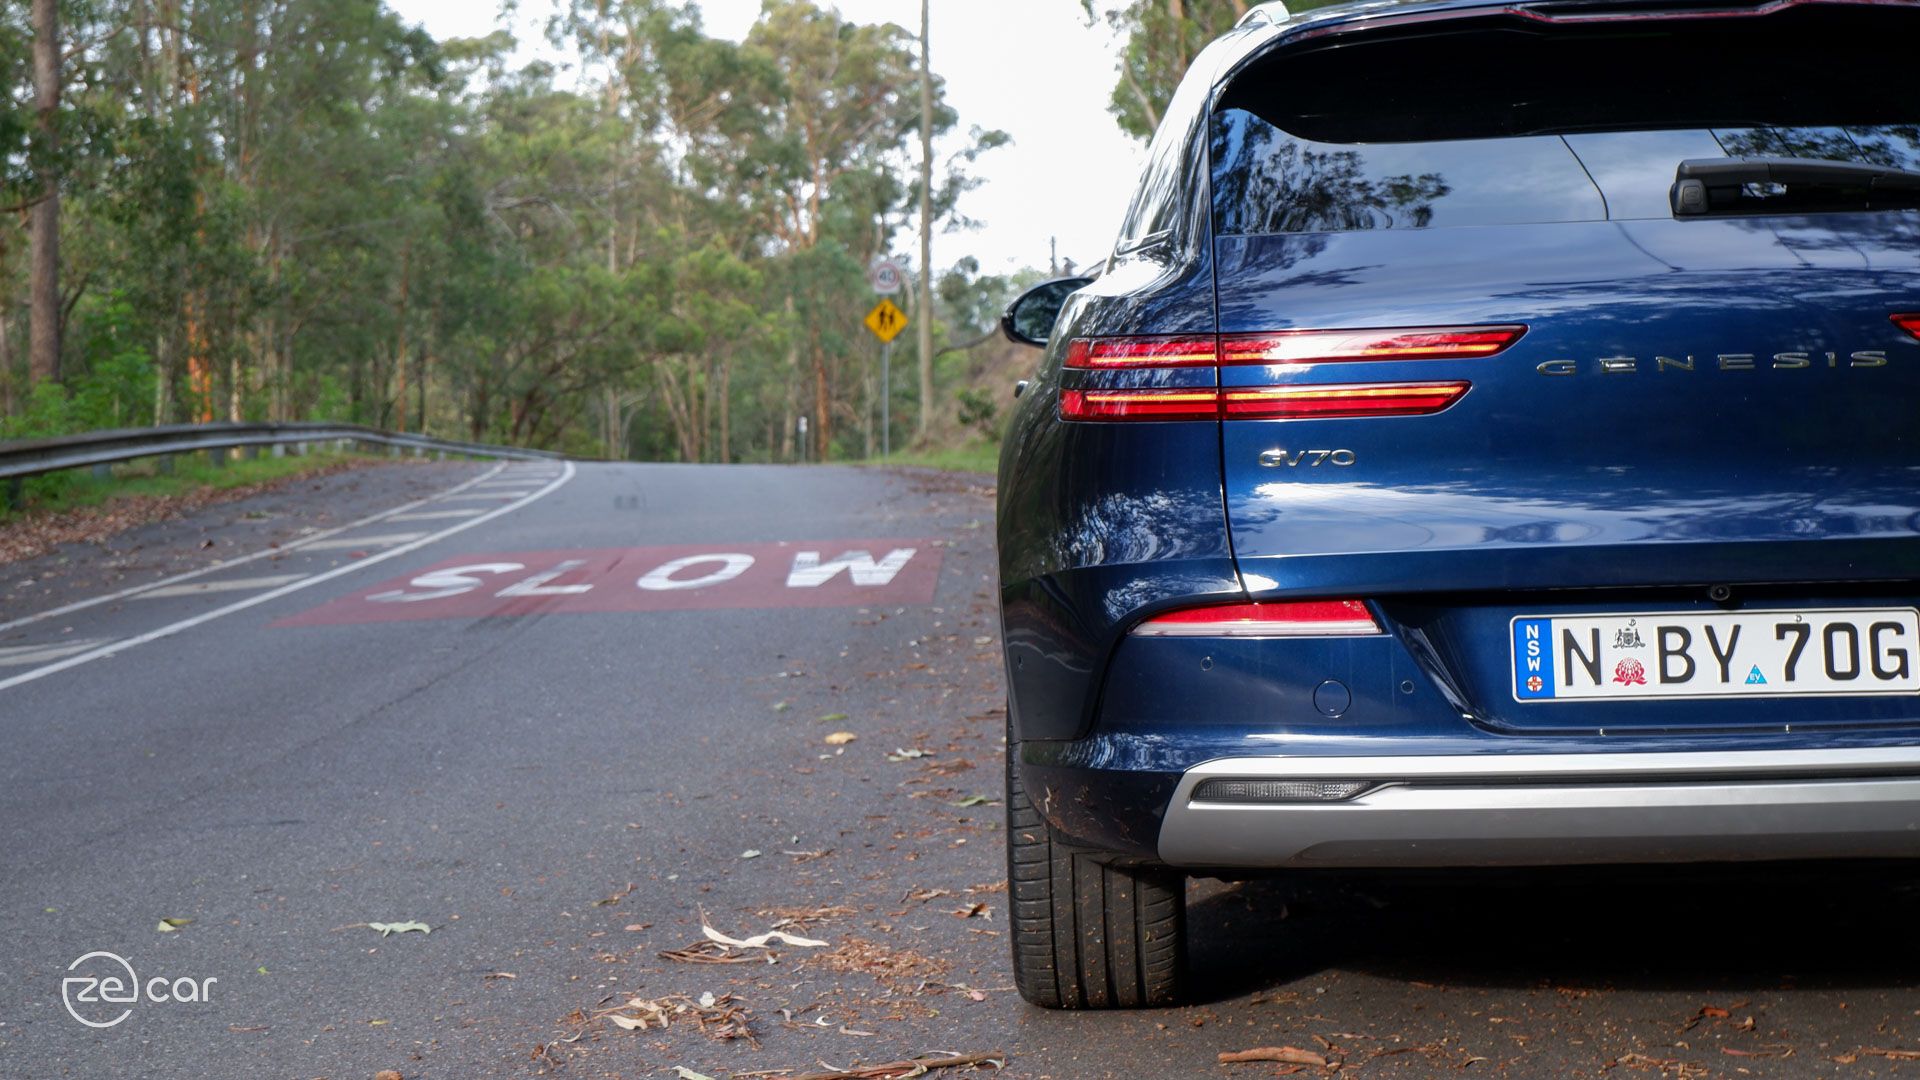 Genesis Electrified GV70 rear in front of 'slow' on road